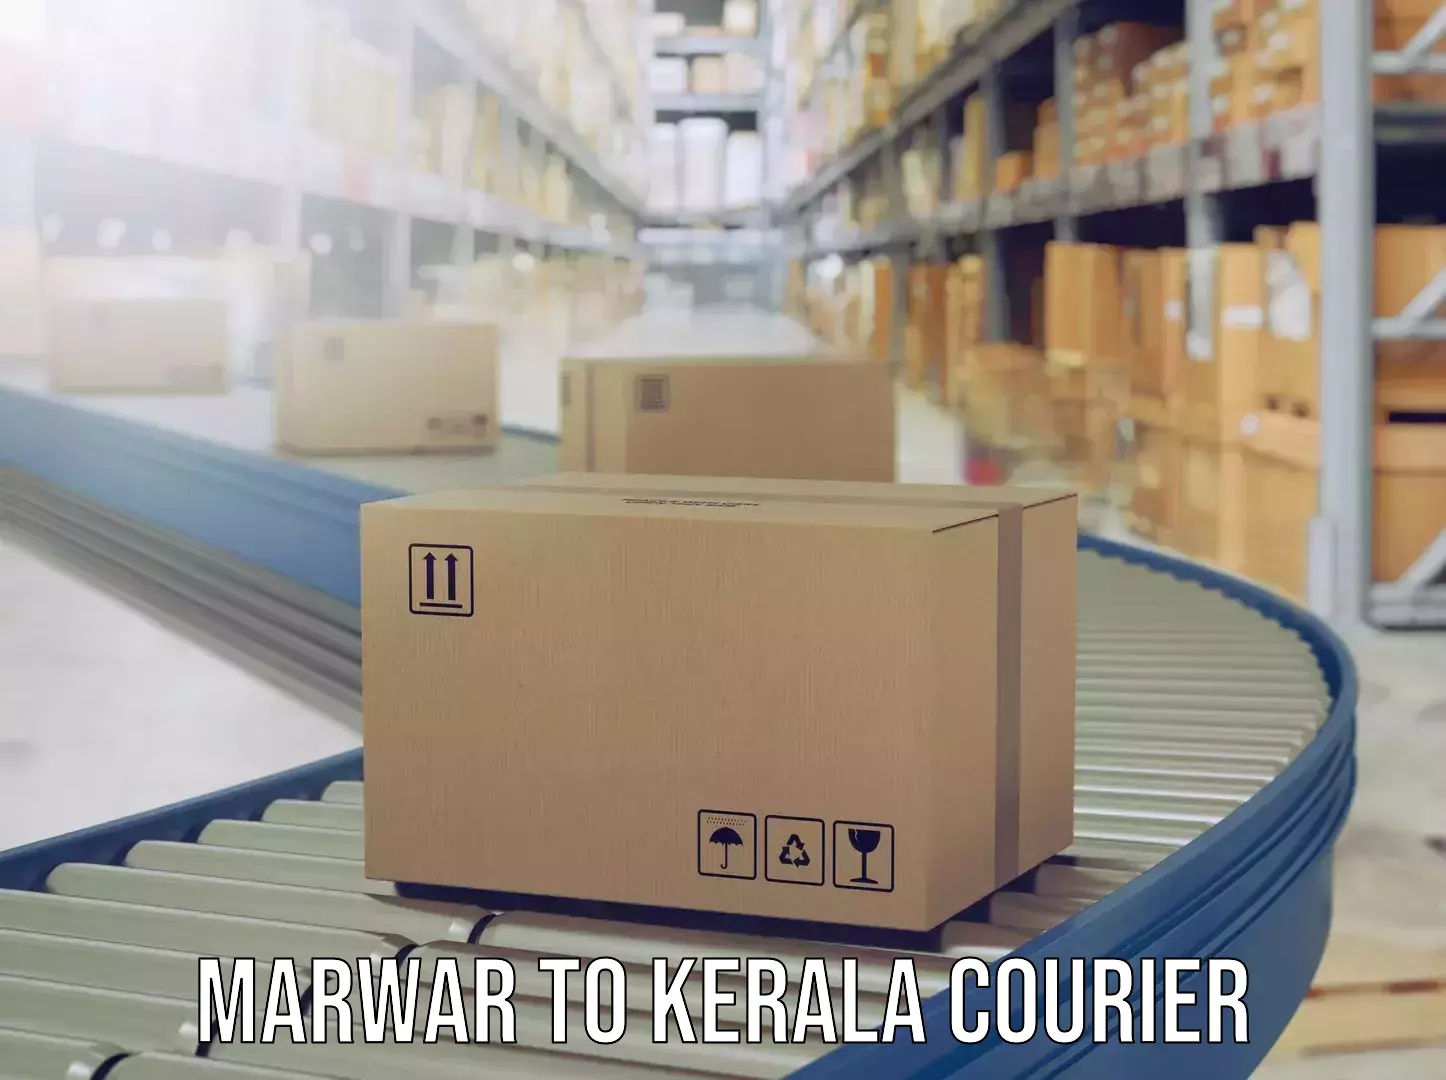 Luggage shipment tracking in Marwar to Pathanamthitta